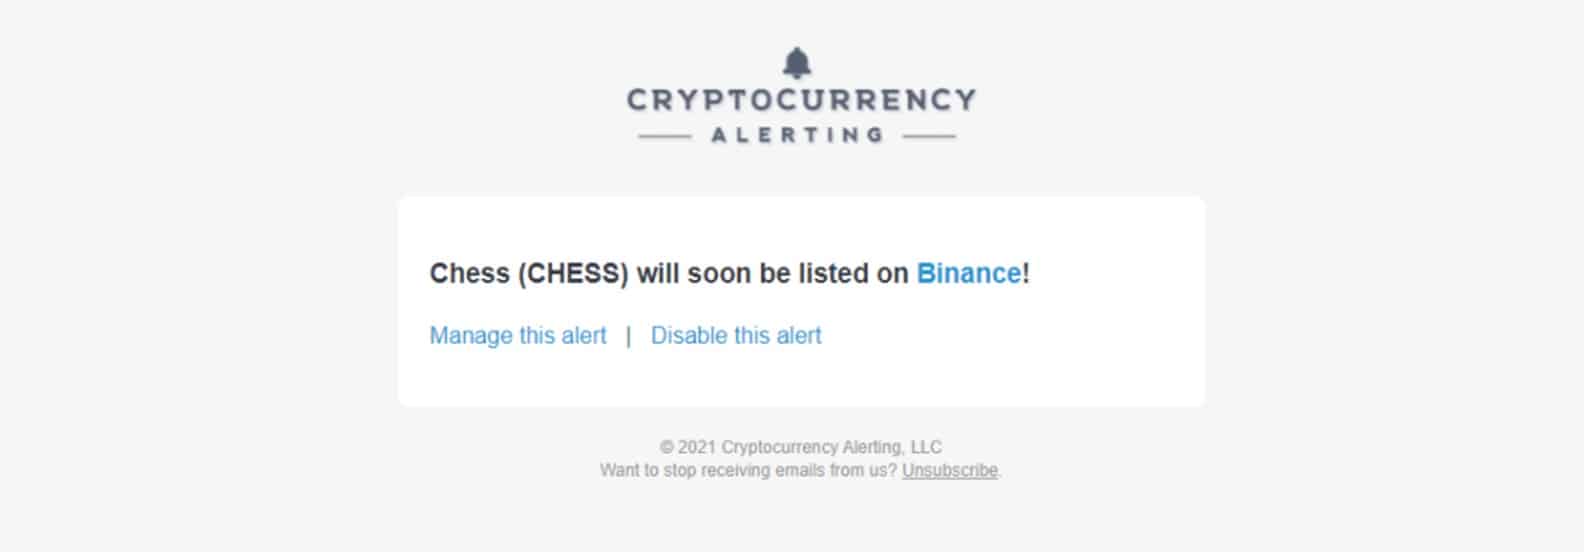 email alert to use in strategy to make money with cryptocurrencies